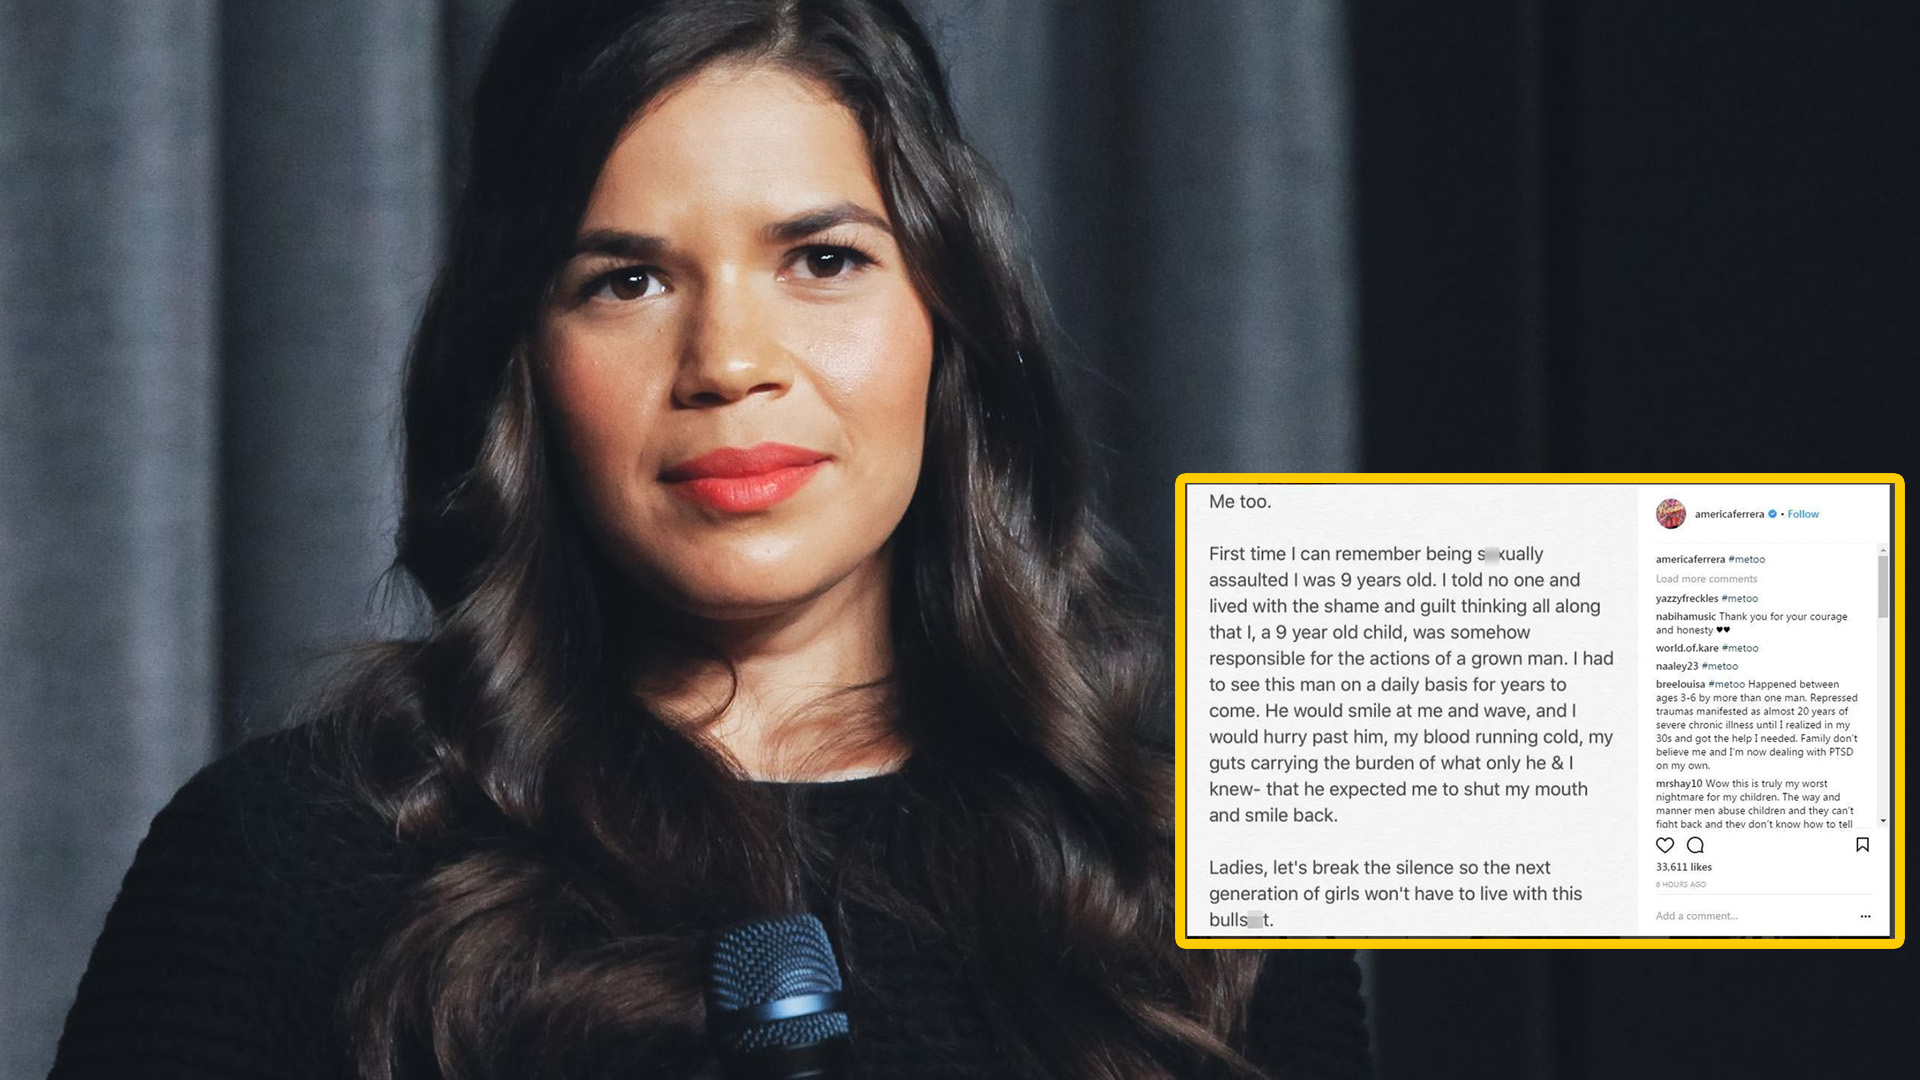 America Ferrera Joins Me Too Movement, Said She Was Assaulted